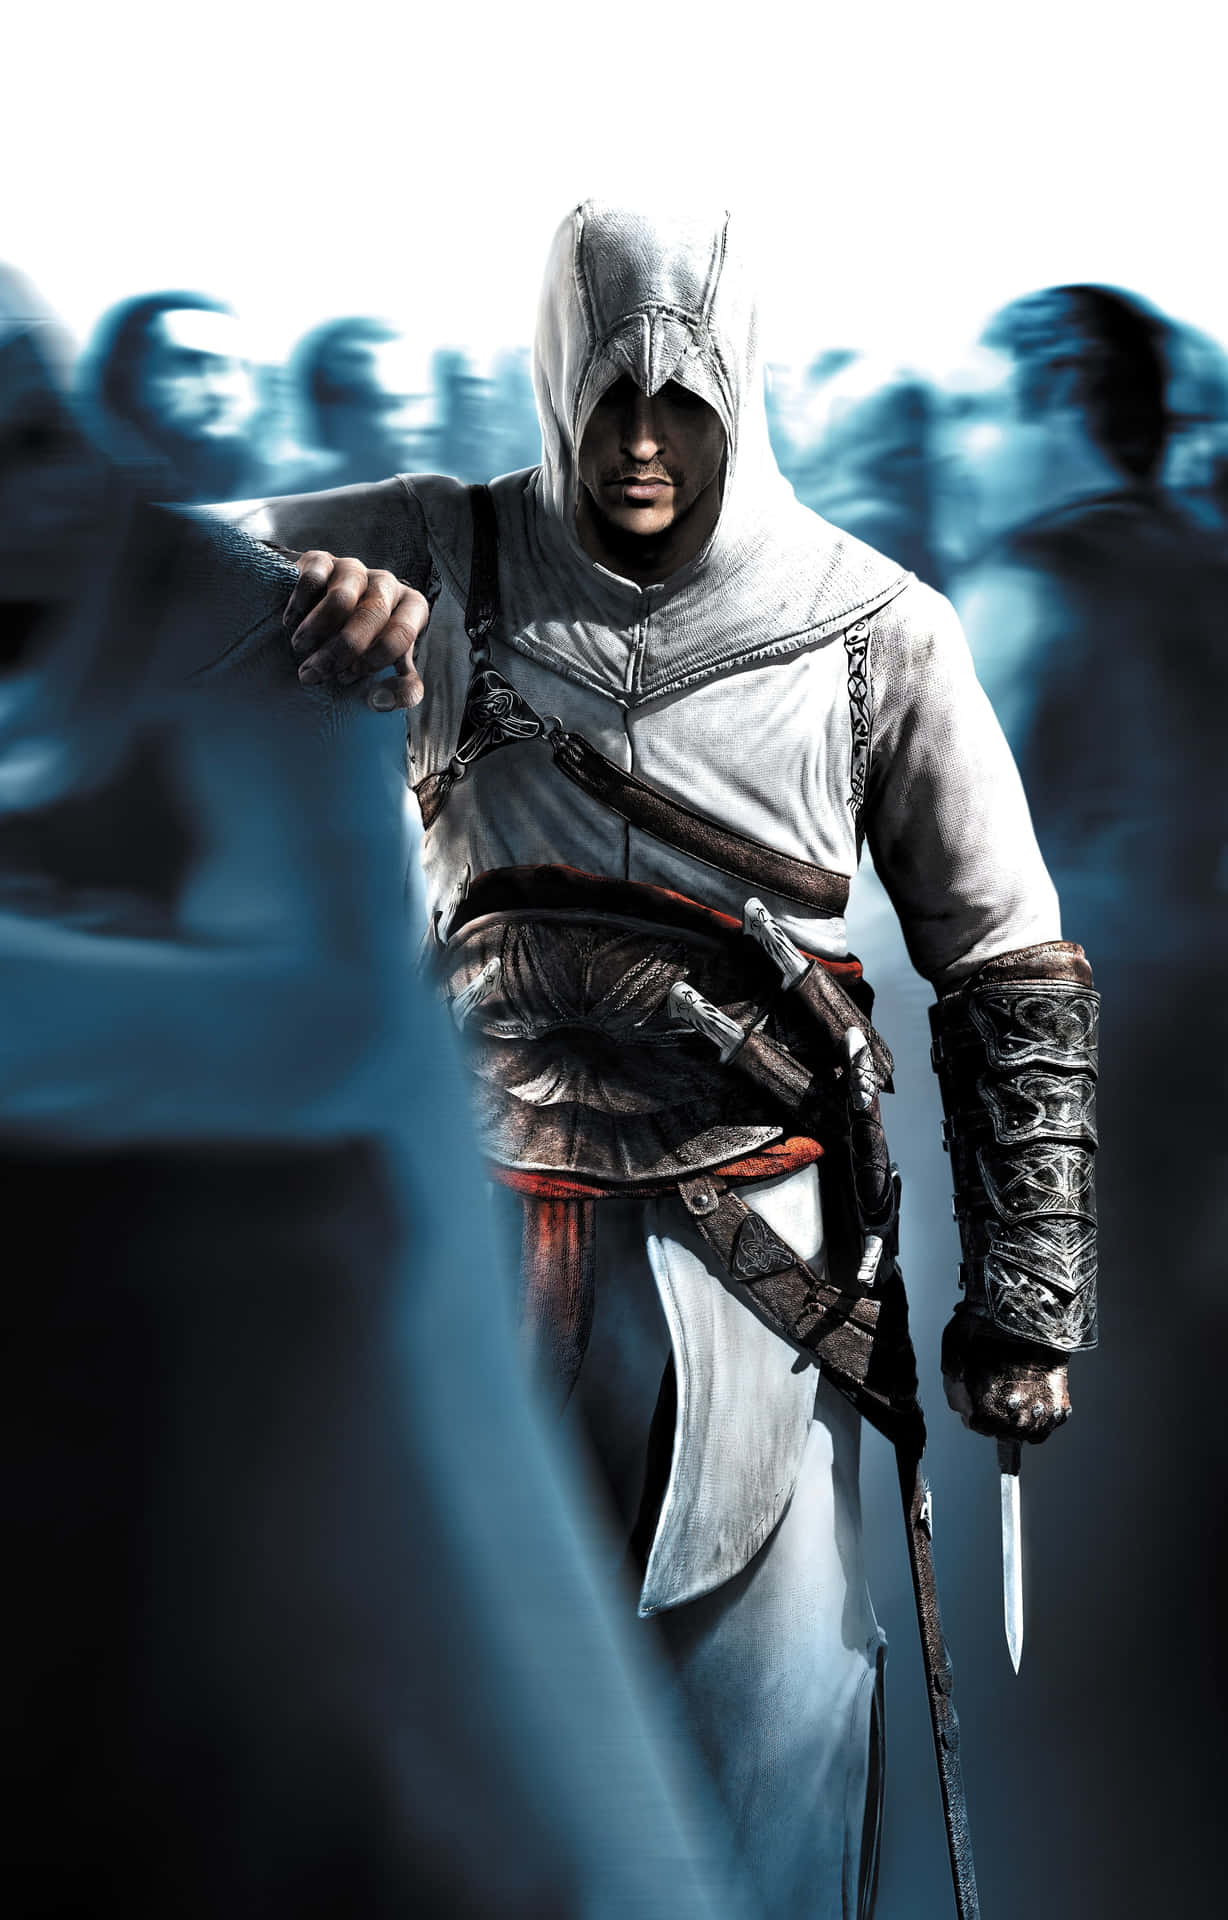 Altair standing on a rooftop, preparing for his next mission in Assassin's Creed. Wallpaper